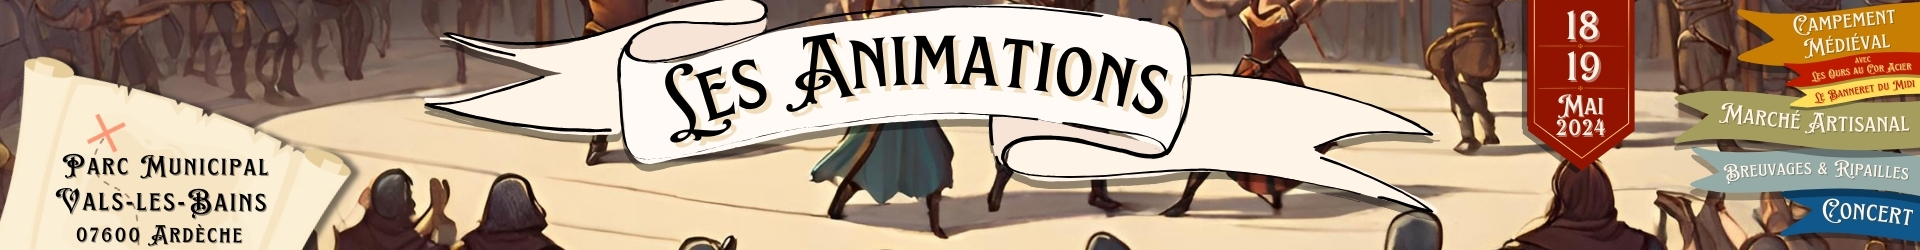 banniere-animations